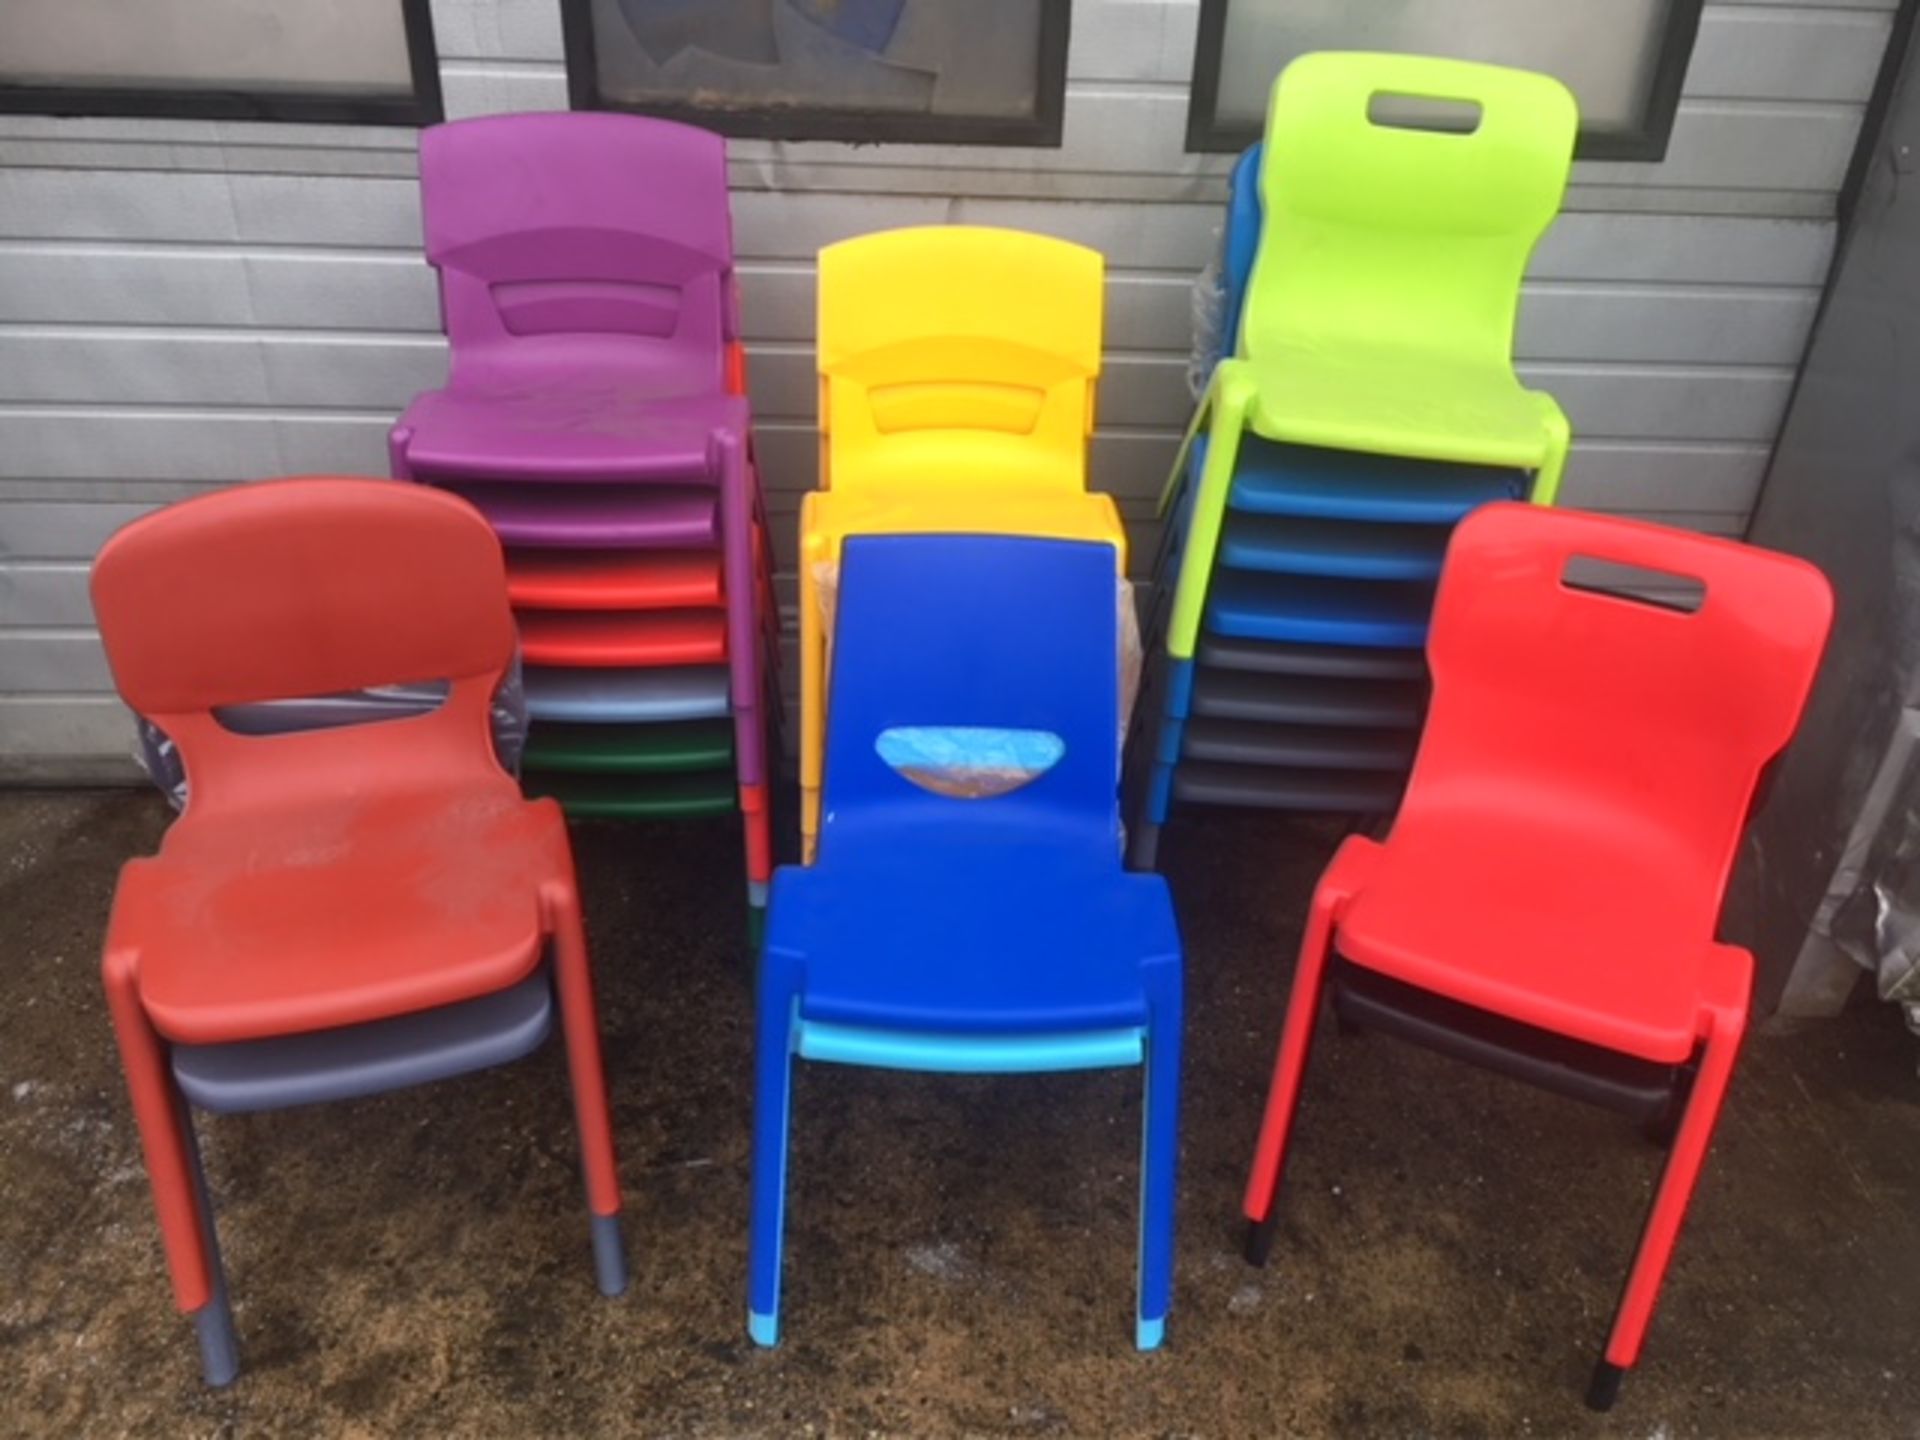 V Grade A Manufacturer Samples - Mostly Brand New Approx 27 Office & School/Nursery Chairs Inc